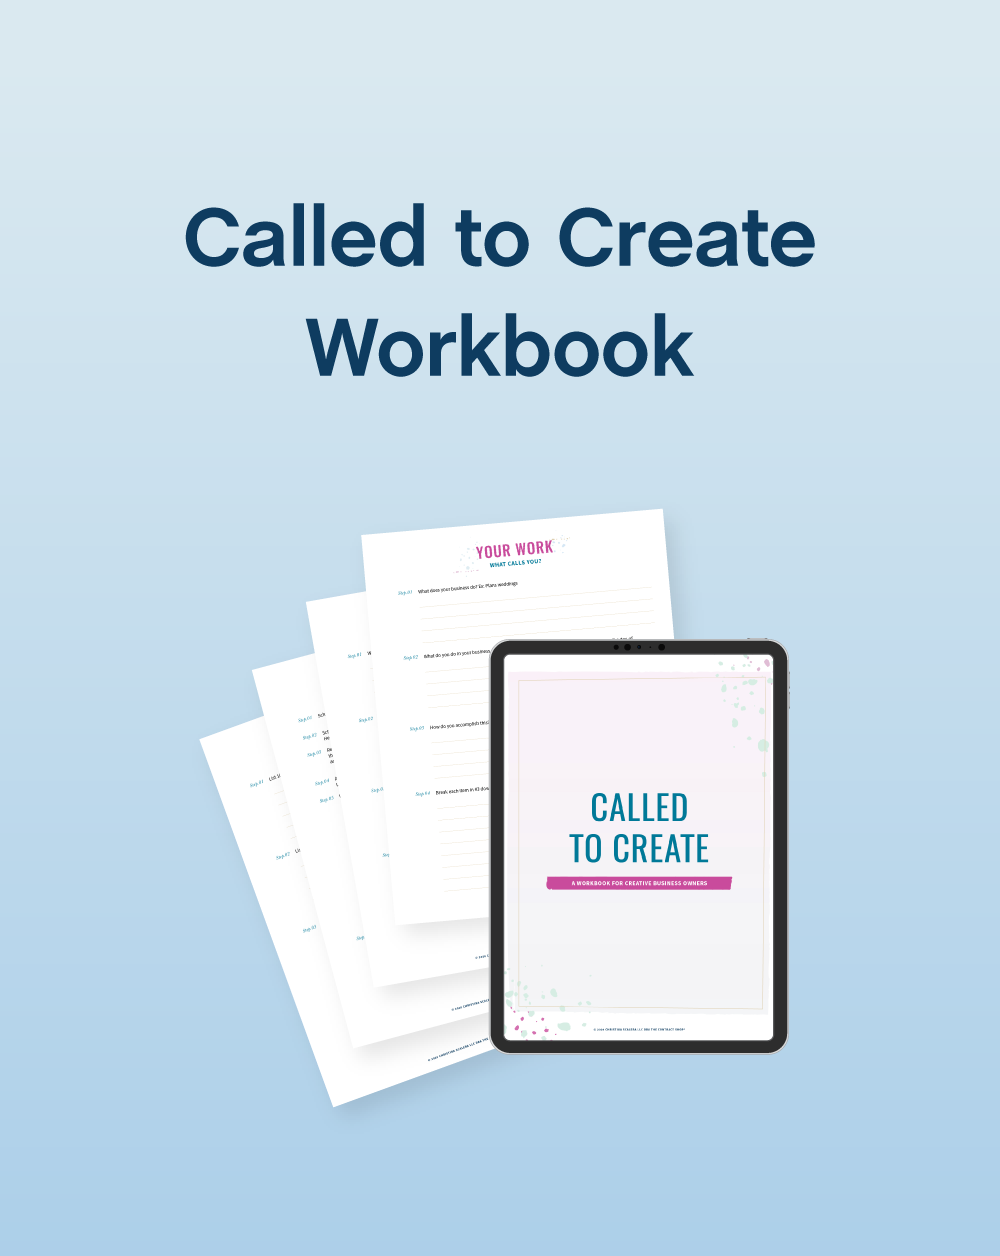 Called to Create Workbook - The Contract Shop®